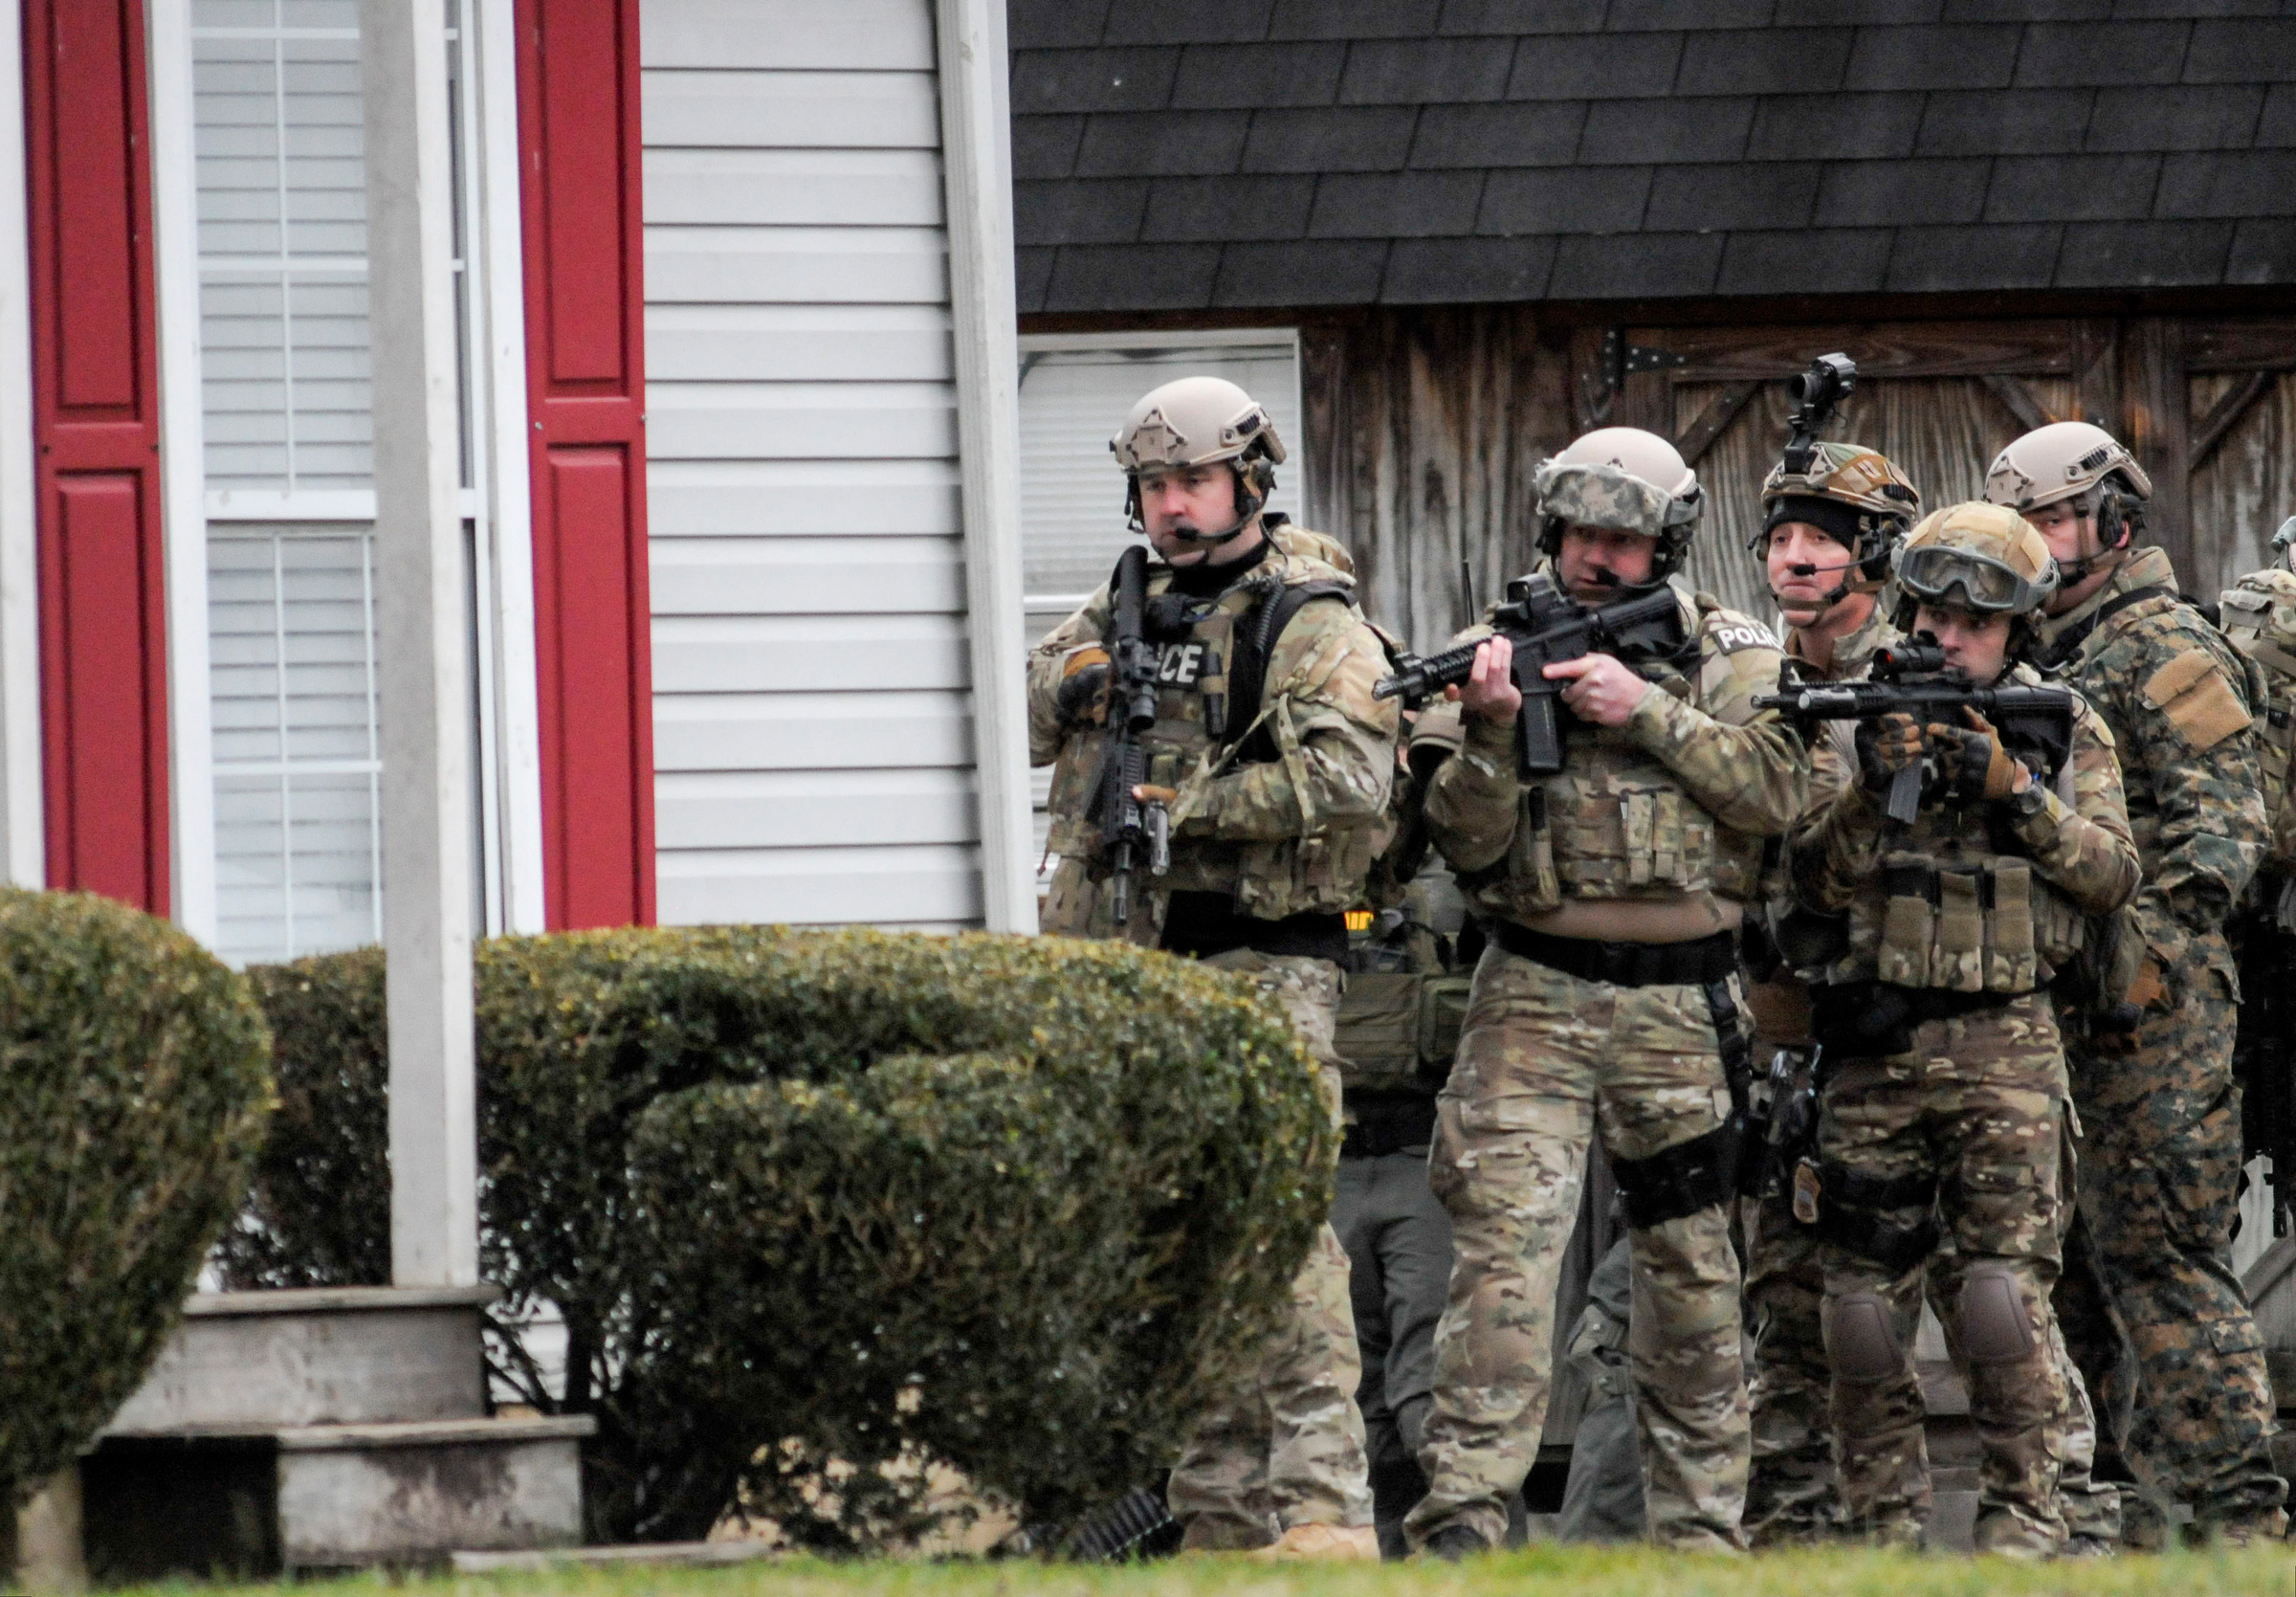 PHOTO: Members of the Marion County Special Response Team stand ready outside a house in Powell's Crossroads, Tenn., Jan. 23, 2018.